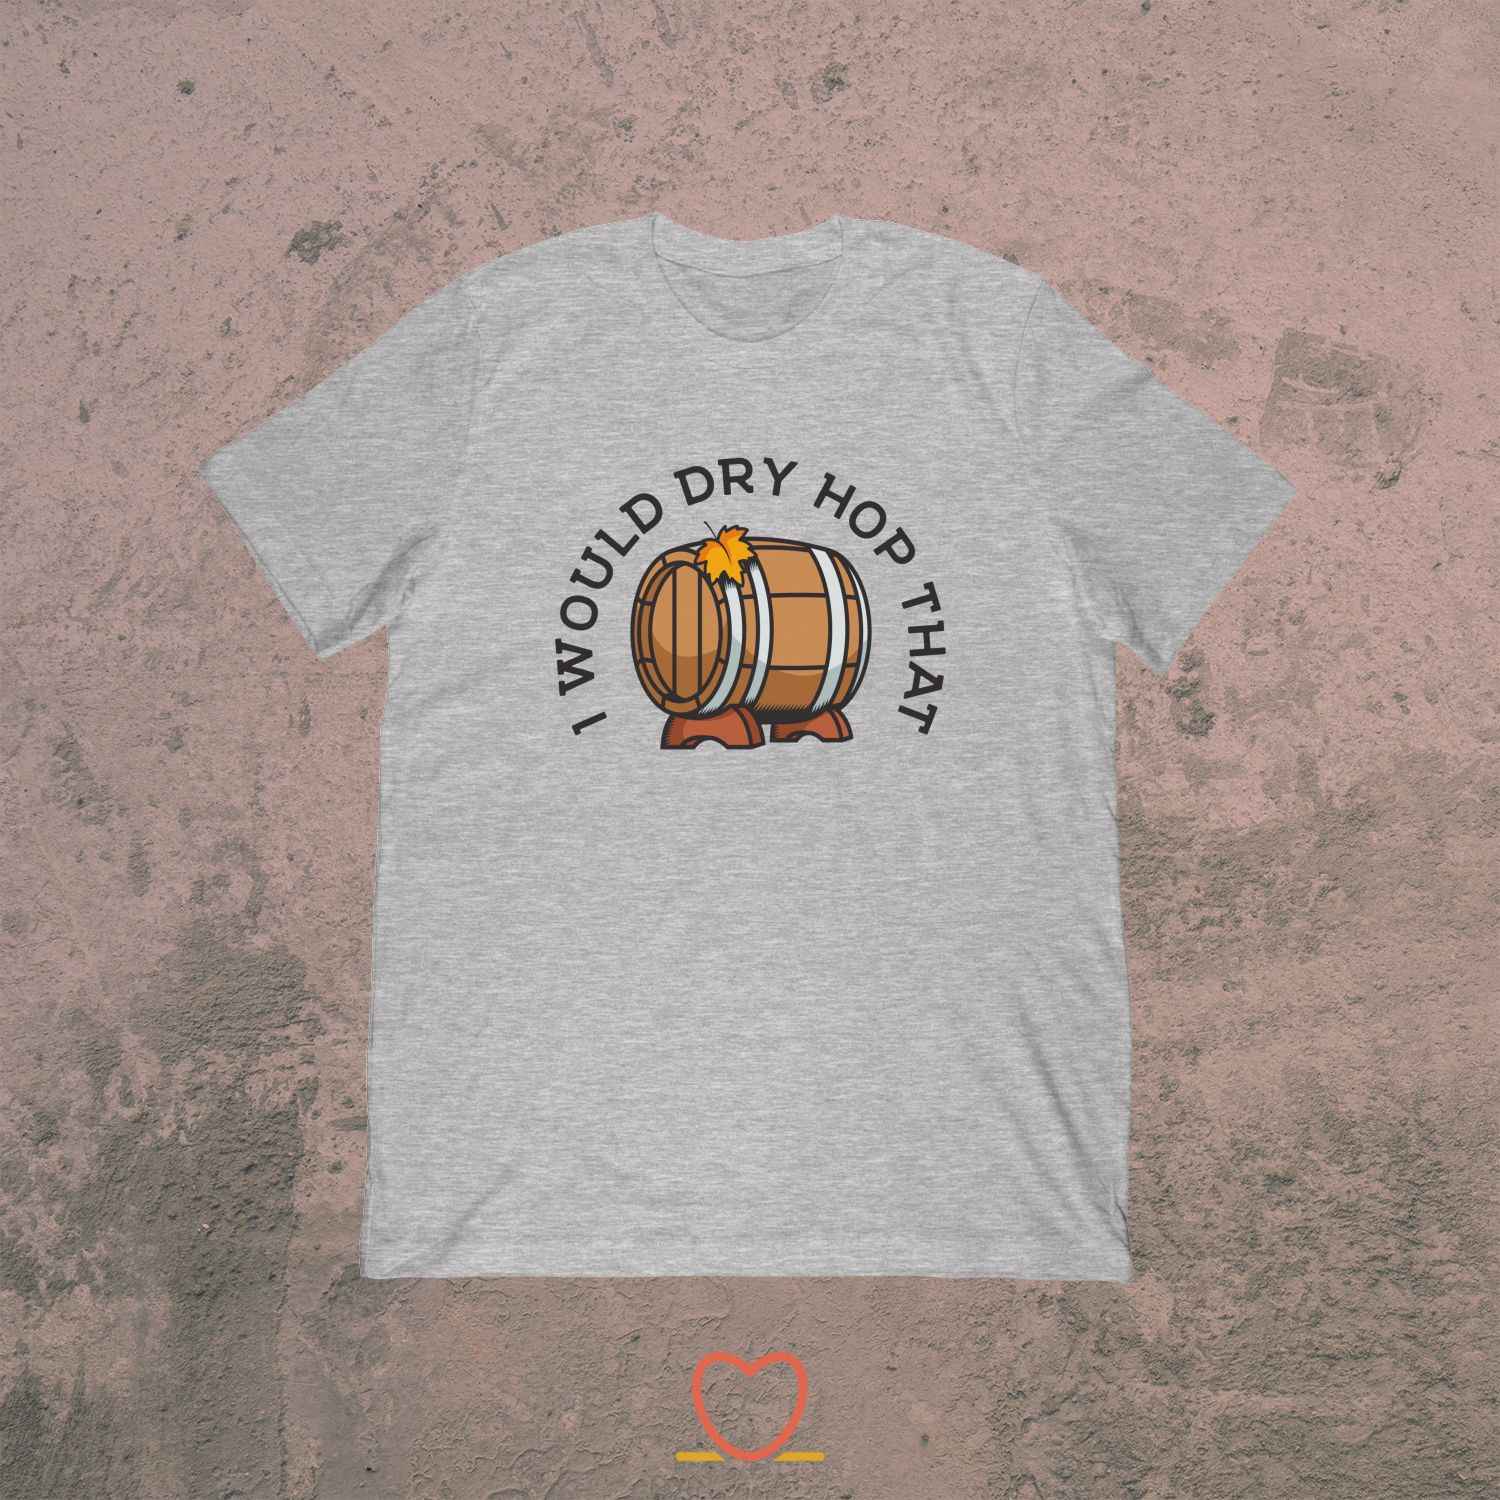 I Would Dry Hop That – Home Brewing Tee